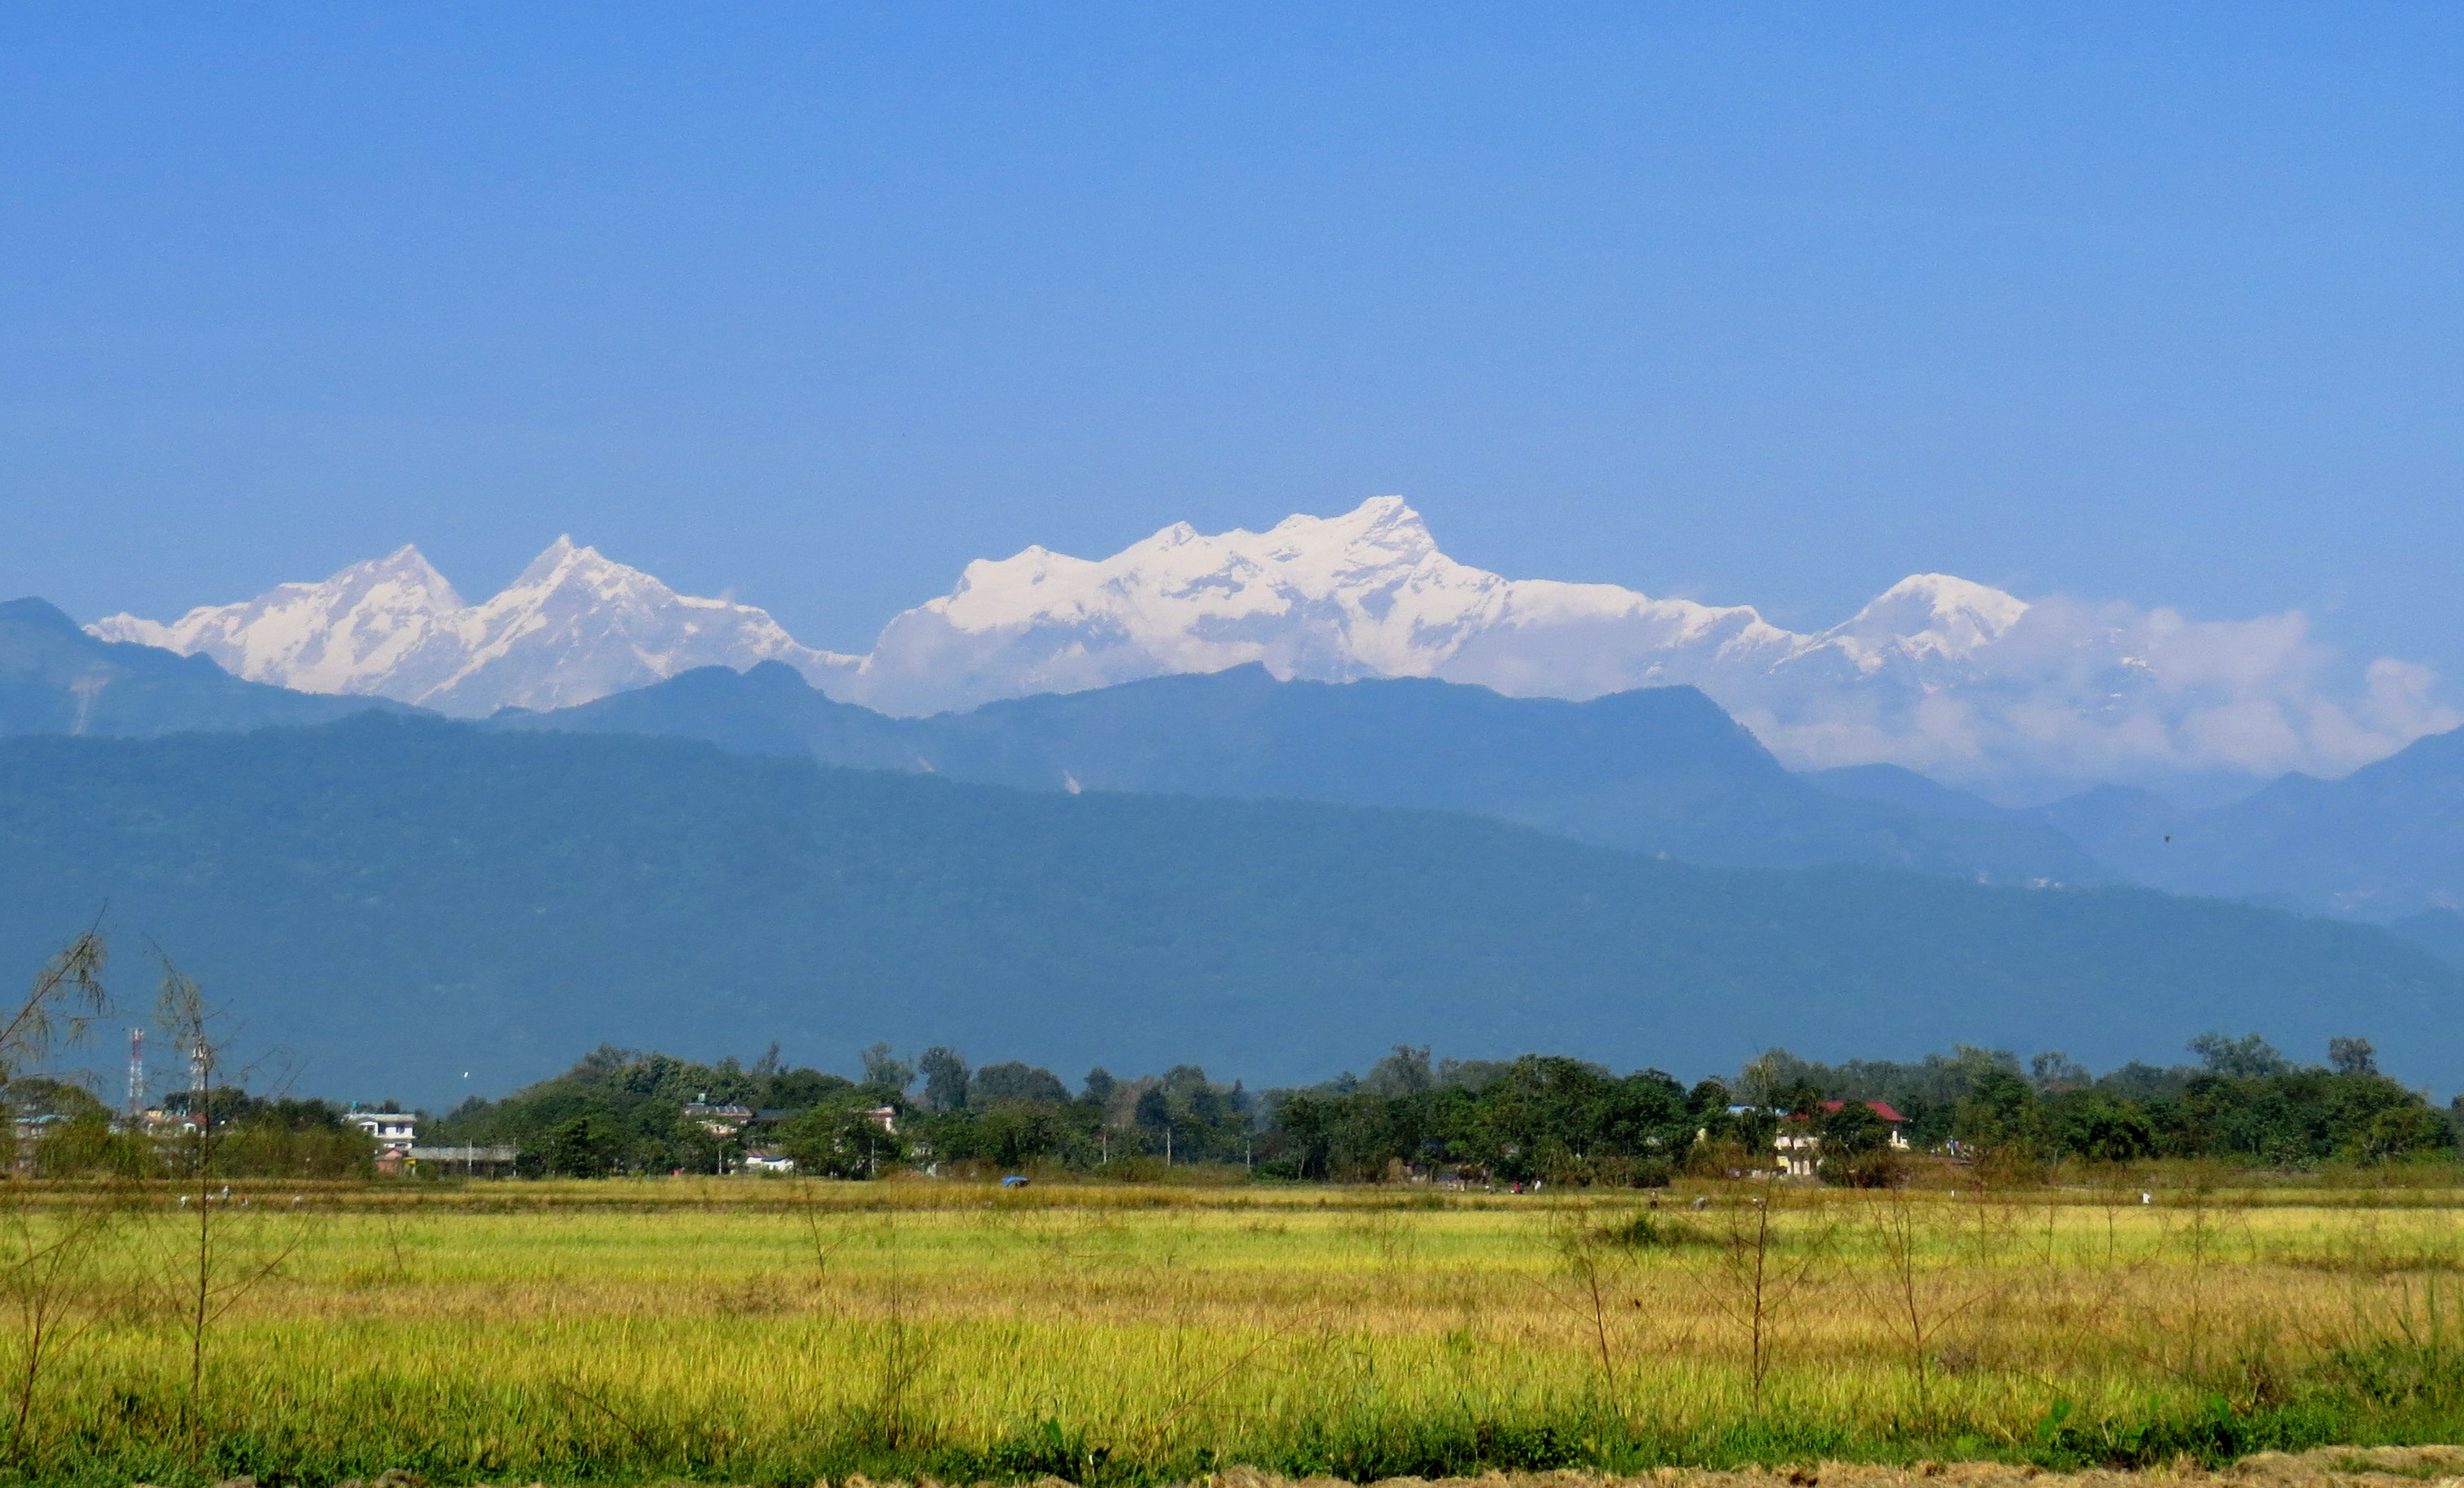 Snow-capped mountains as seen from Chitwan